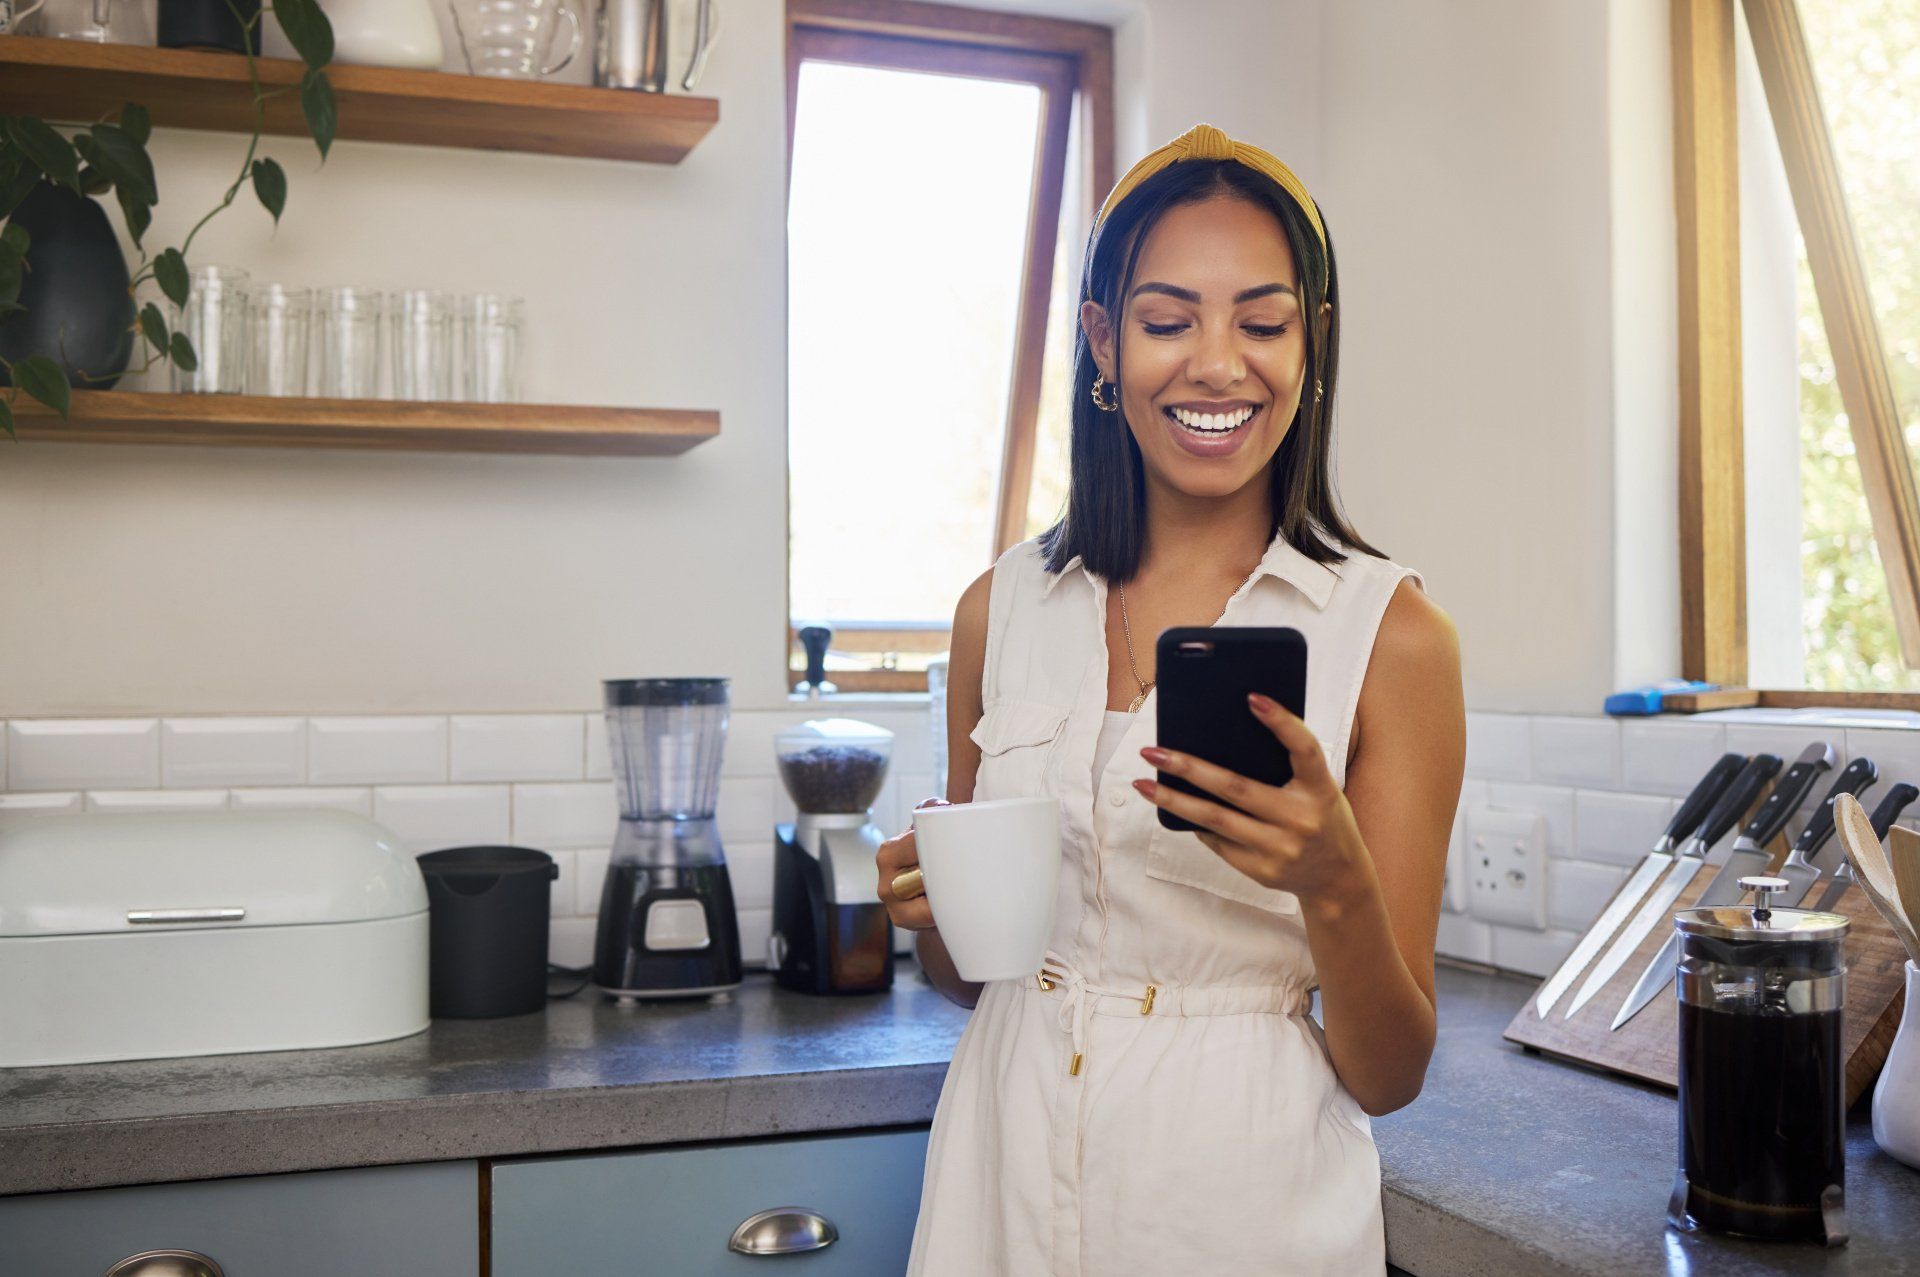 woman standing in a kitchen smiling at her phone screen & holding a mug